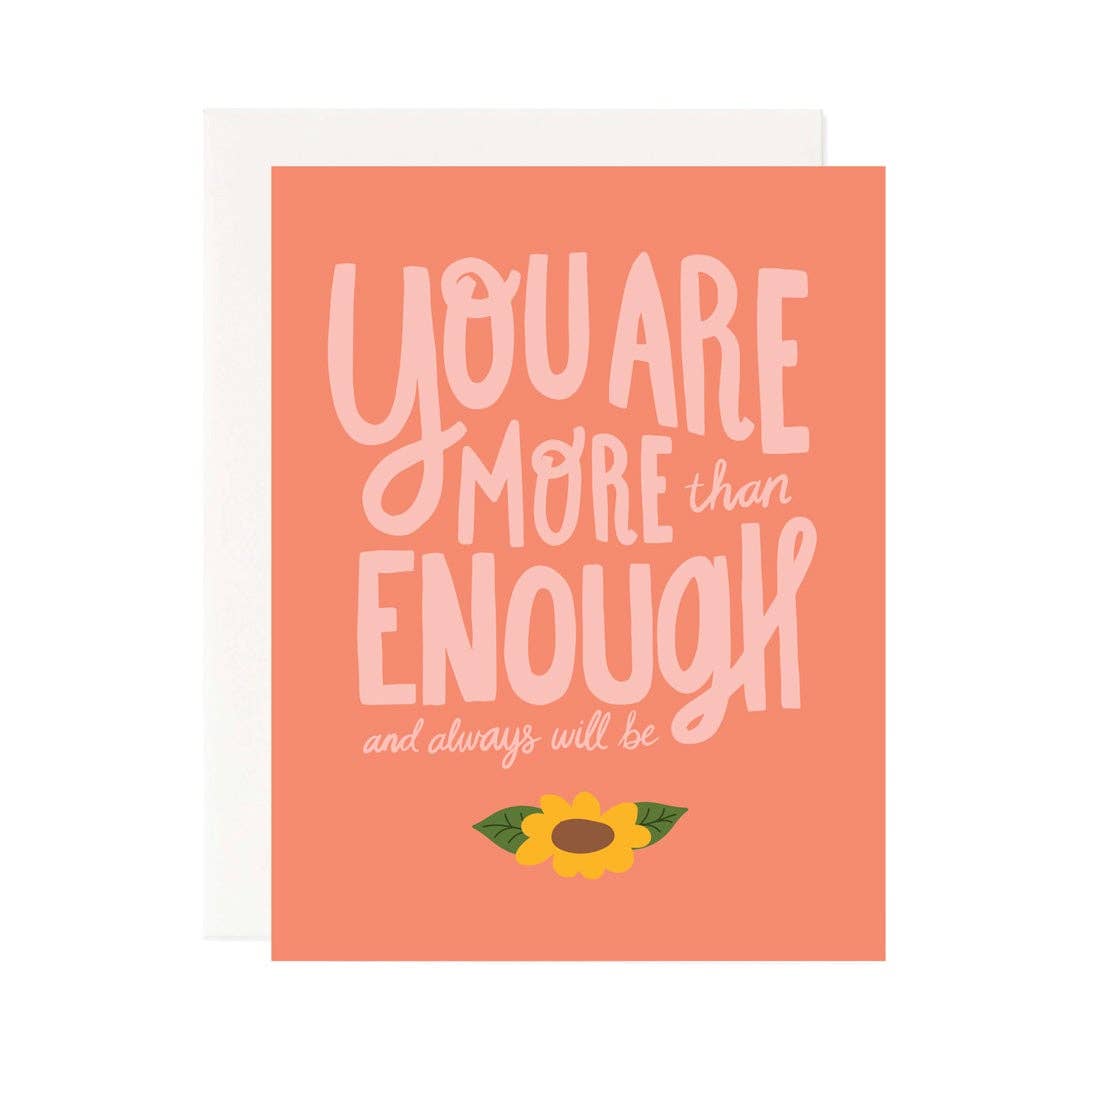 "You are more than enough and always will be." Greeting card text on orange background with a drawing of a yellow flower below the text.